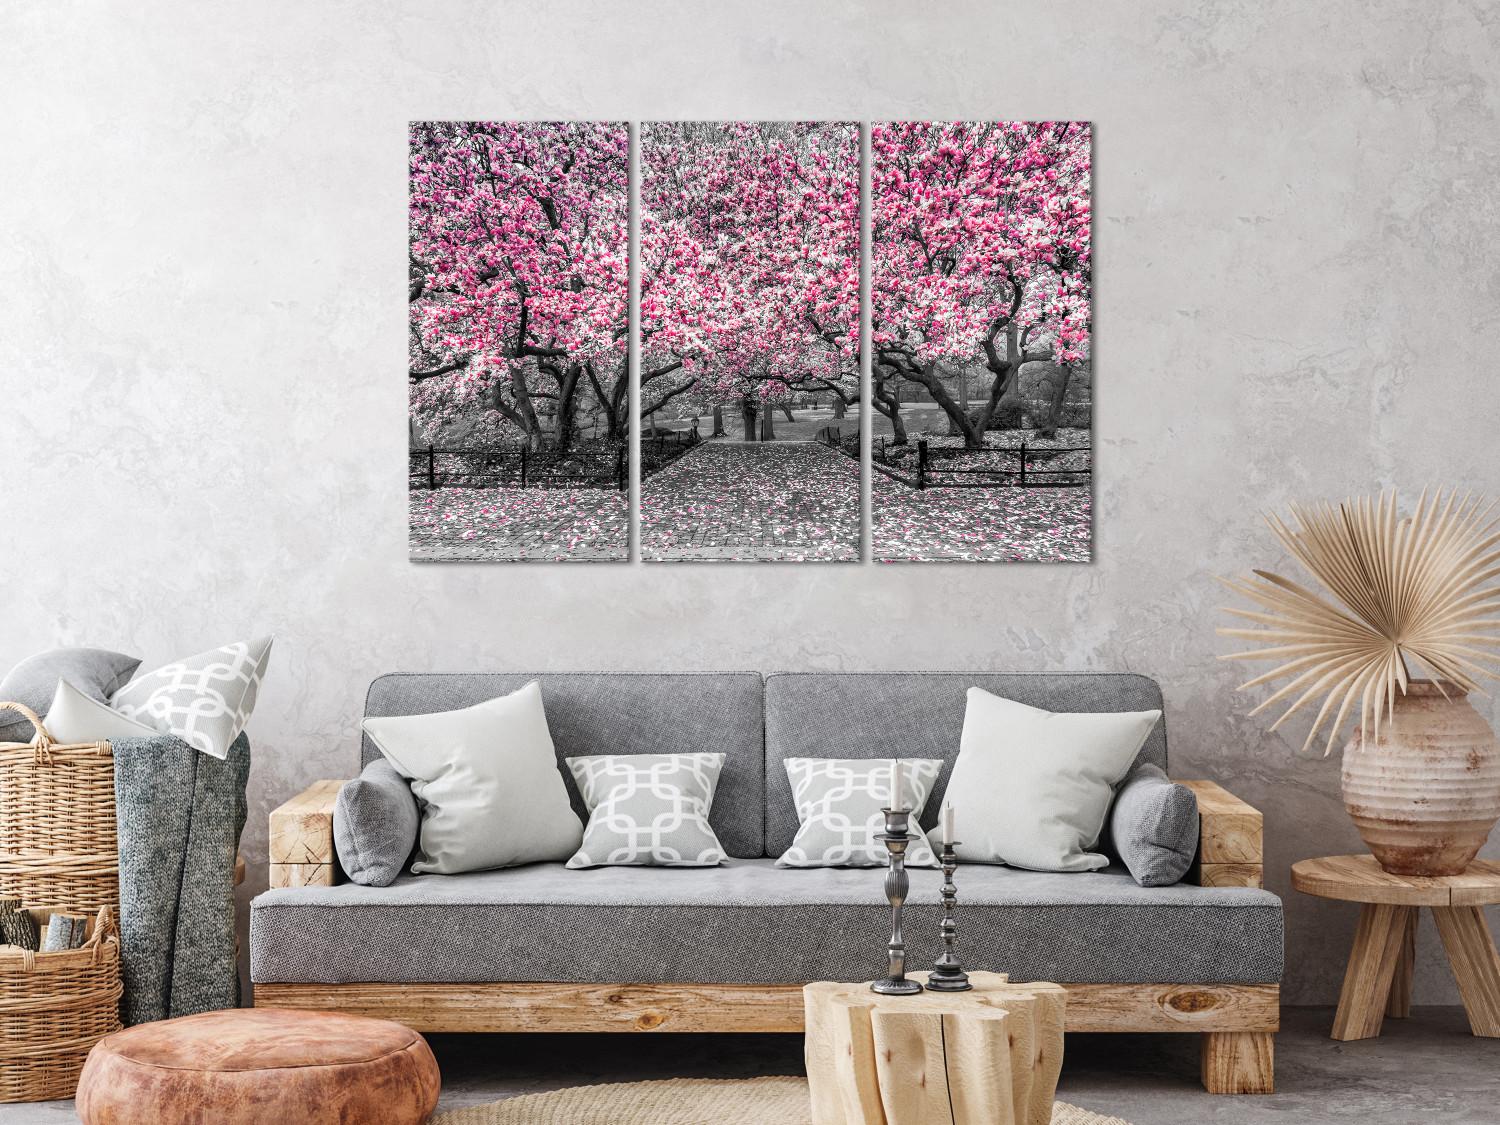 Canvas Blooming Magnolias - triptych with magnolia trees and pink flowers